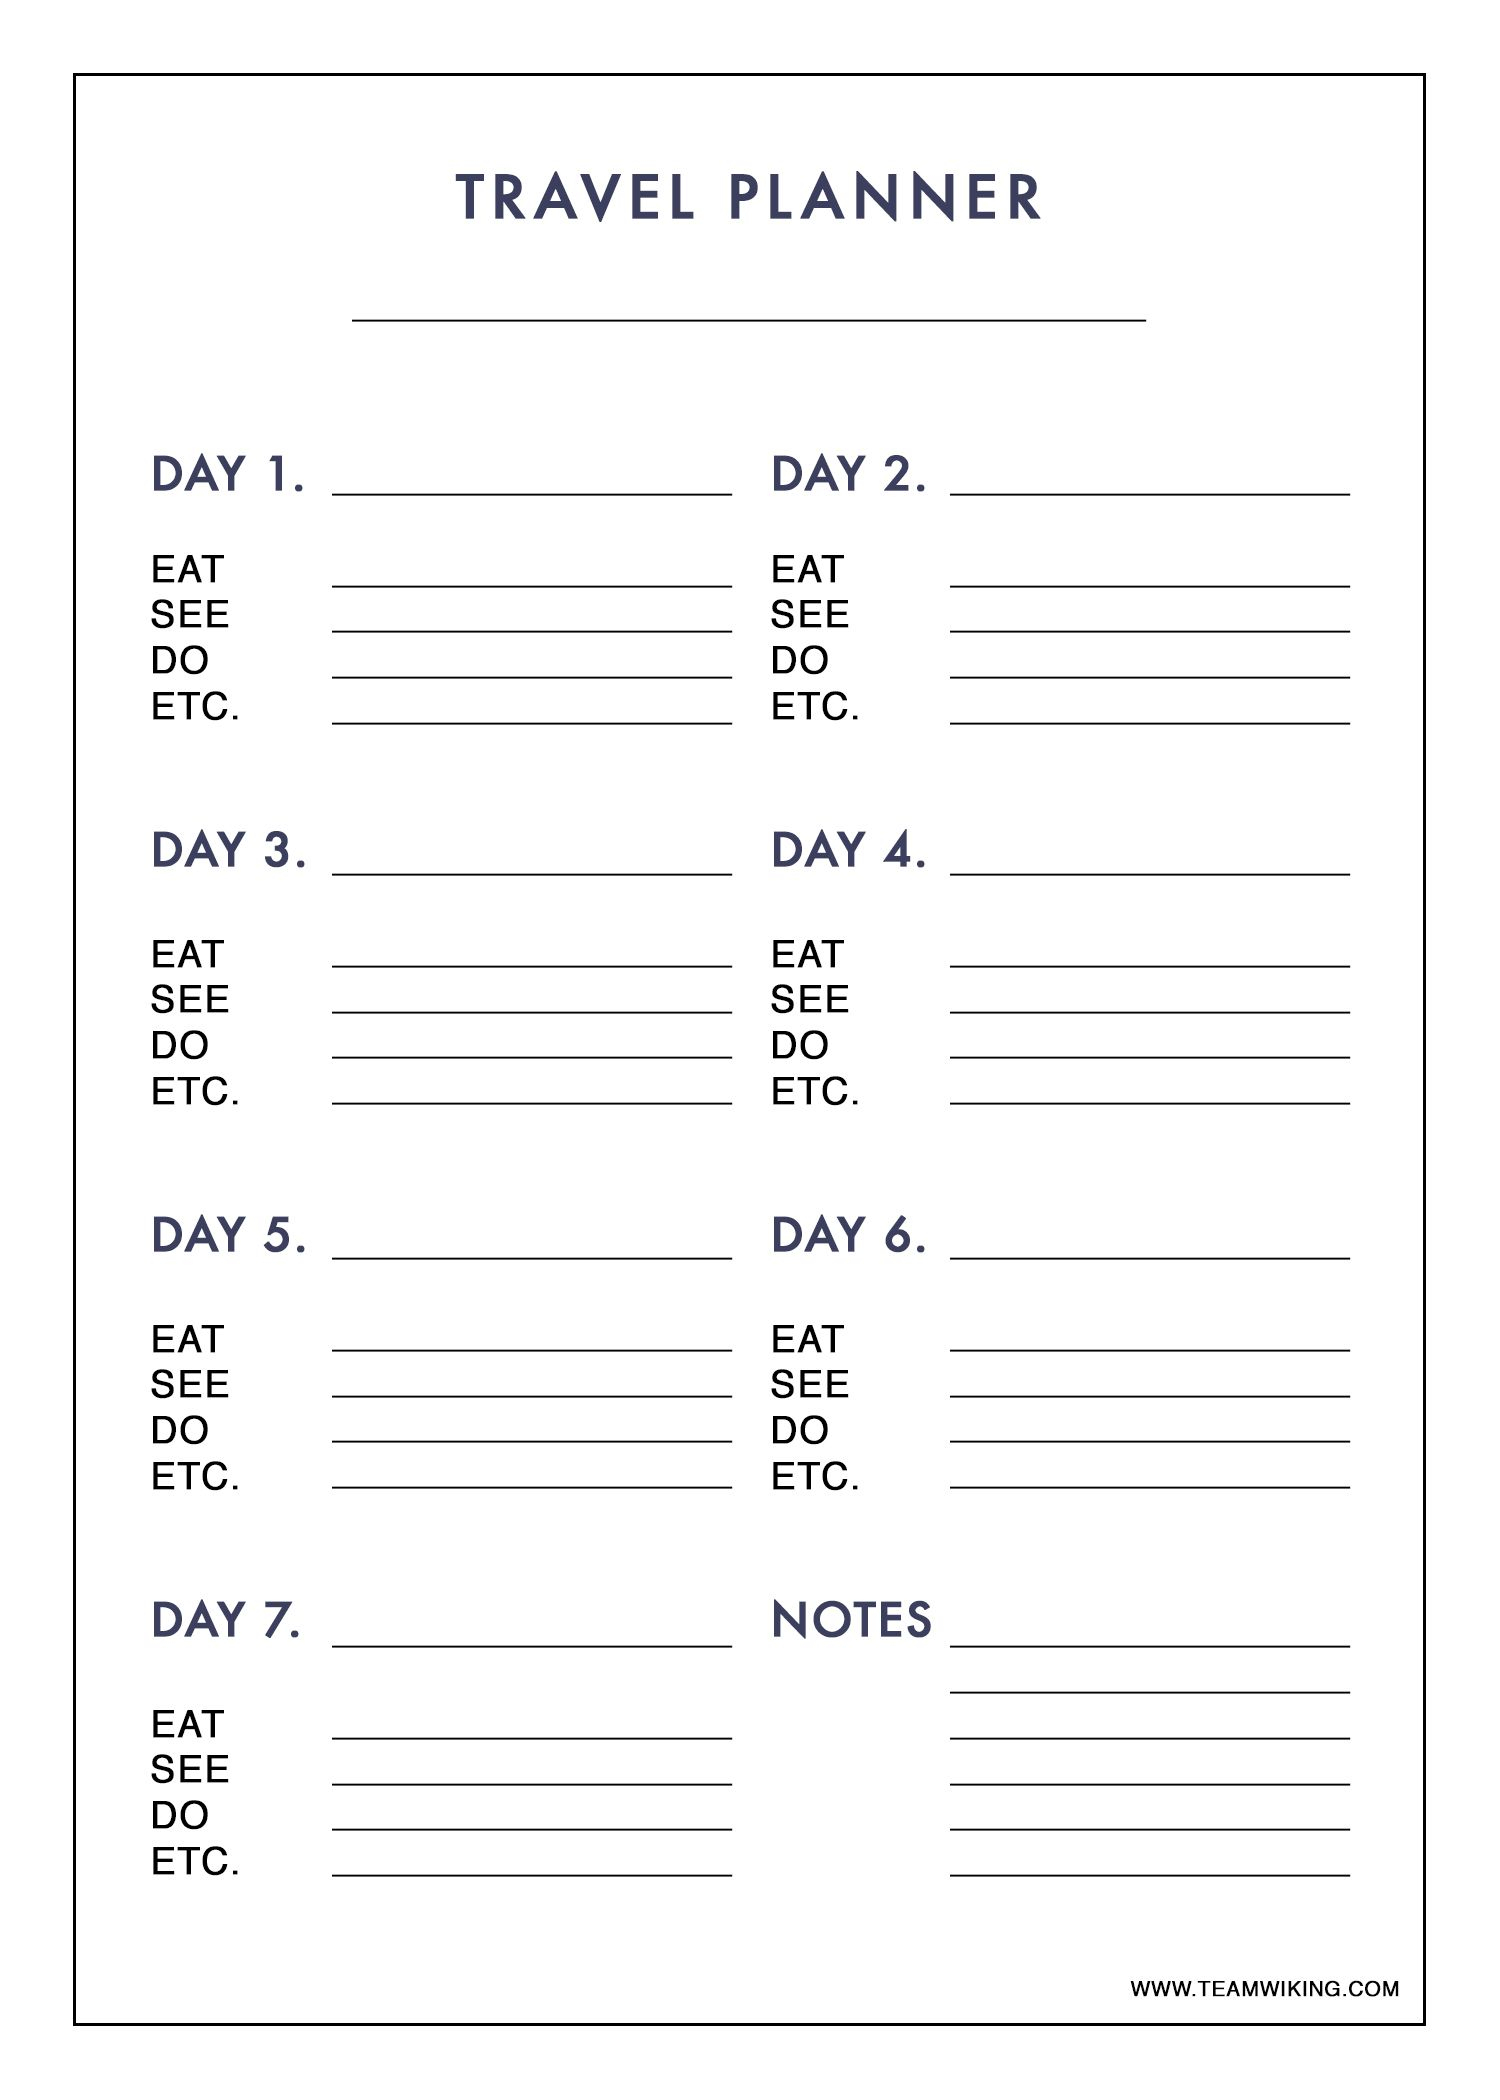 Free Printable 7 Day Travel Planner (Use To Plan Outfits - Packing - Free Printable Trip Planner